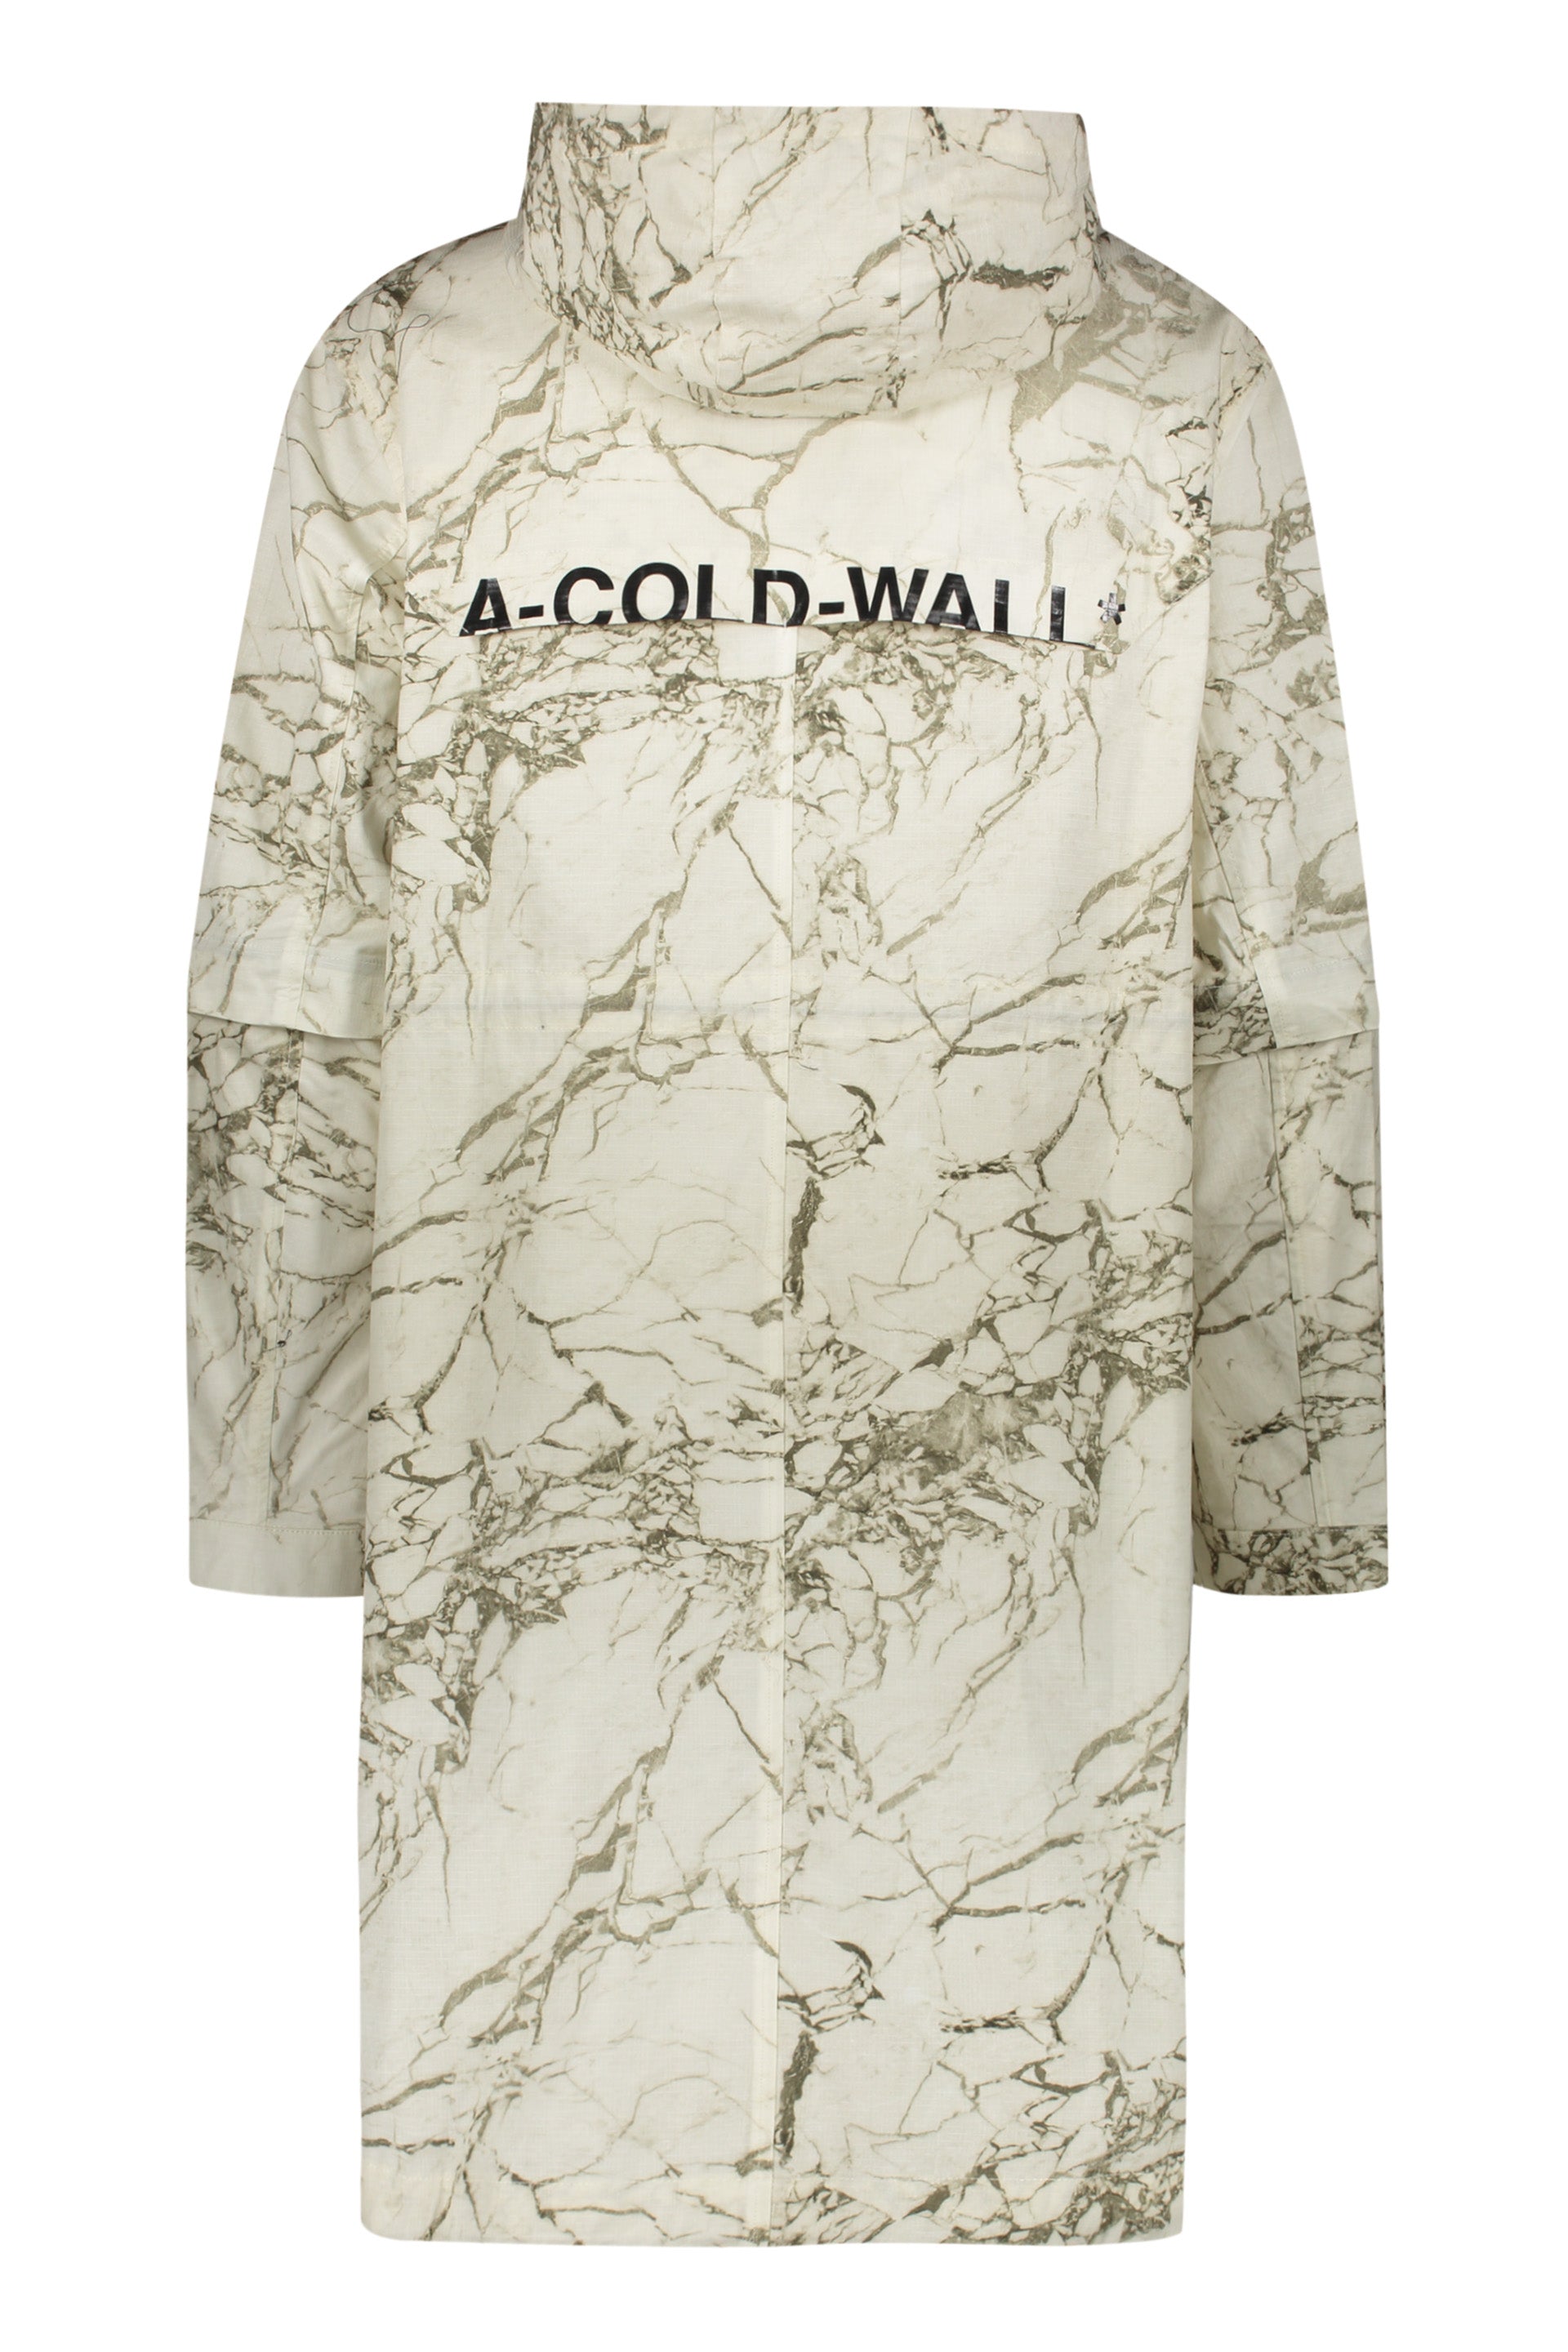 A-COLD-WALL-OUTLET-SALE-Hooded-cotton-parka-Jacken-Mantel-ARCHIVE-COLLECTION-2.jpg